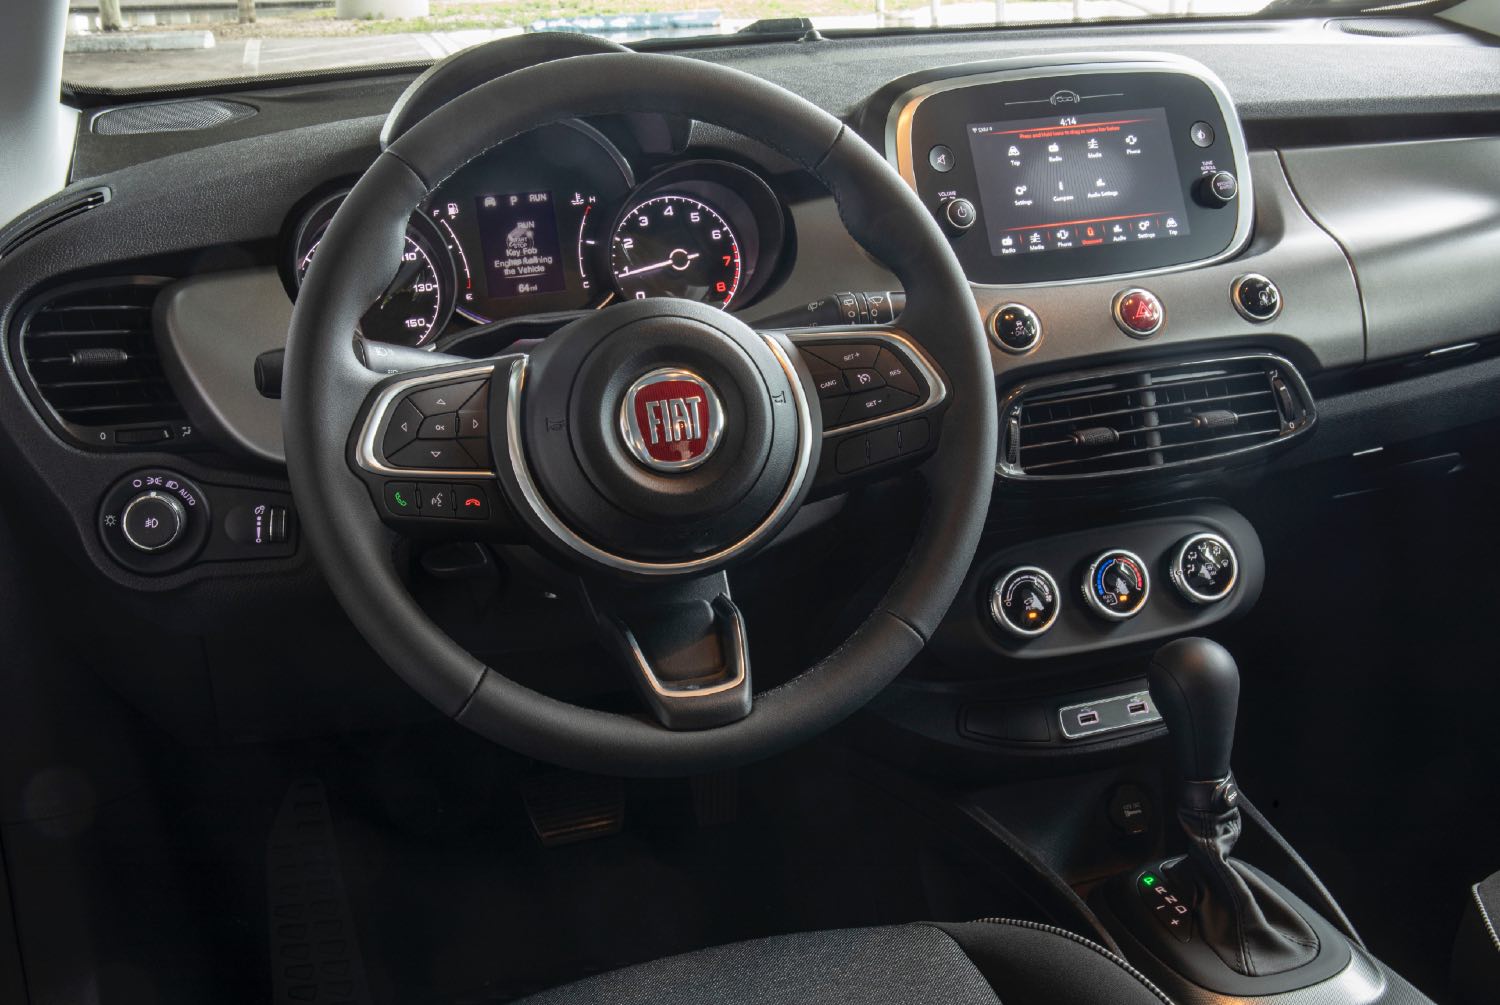 The interior of a Fiat 500x.